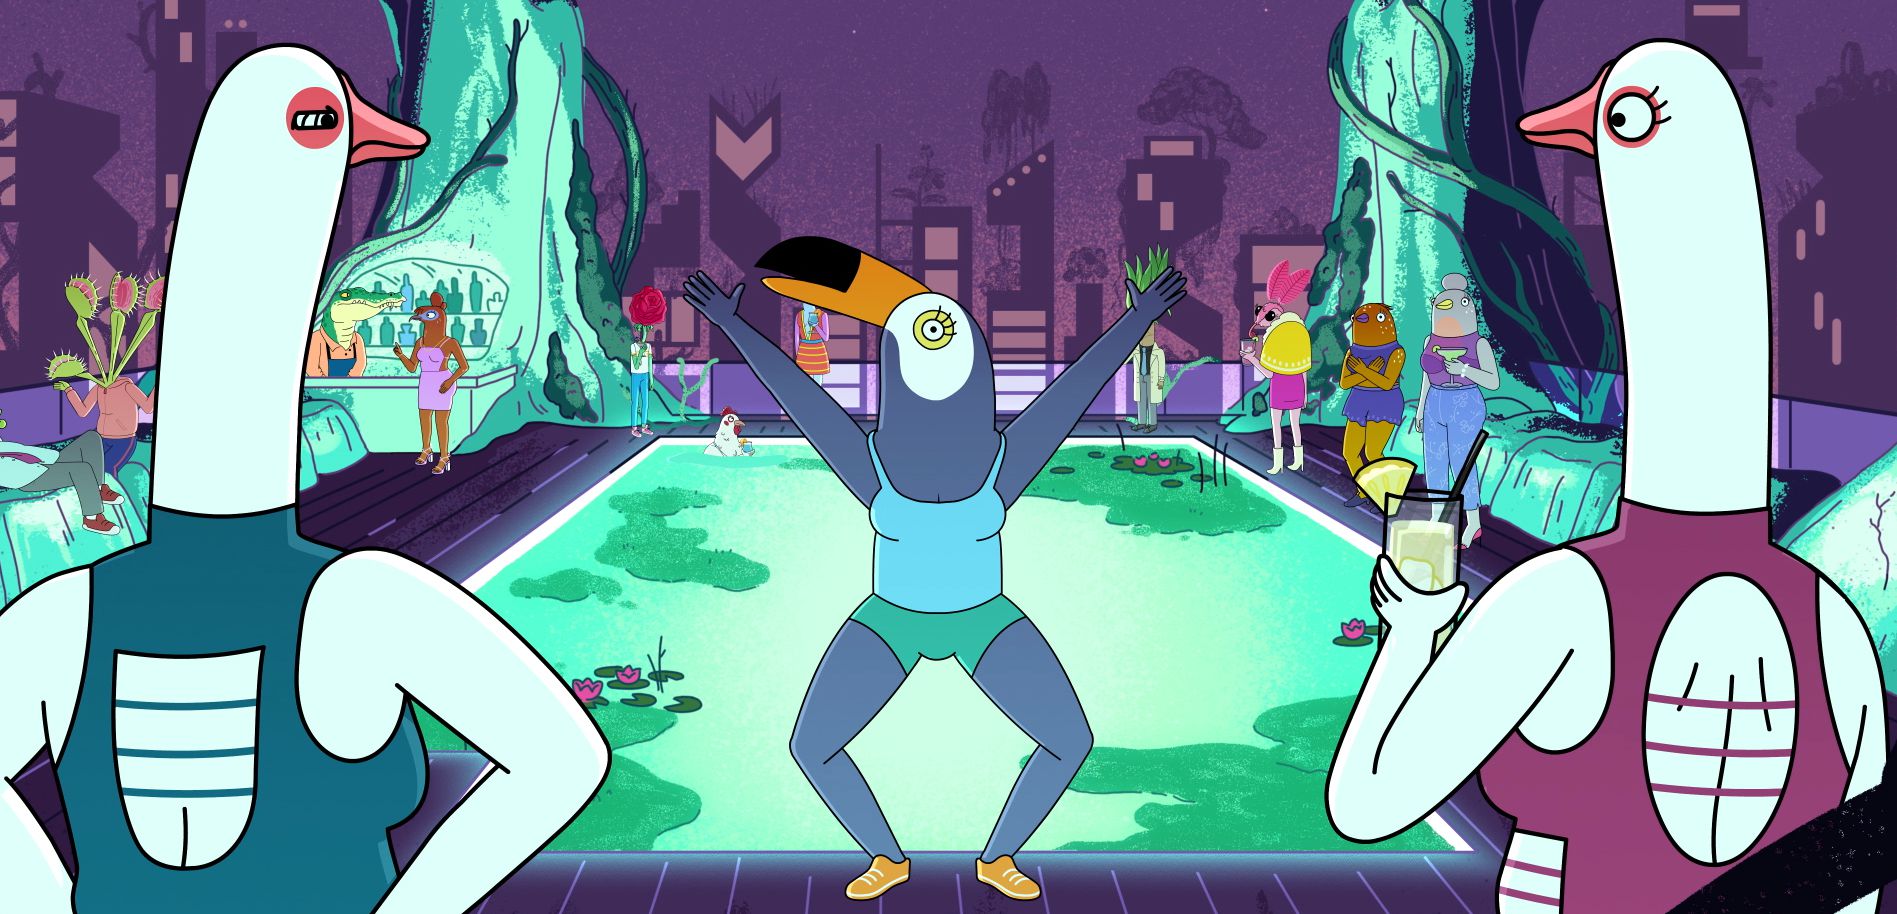 The Second Coming of <i></noscript>
<p> </p>
<p><strong>So <em>BoJack</em> had anthropomorphic, talking animal creatures, but it did feel more or less based in our reality. But <em>Tuca & Bertie</em> has sassy talking plants and pedometers that smell farts, so it’s a lot more outlandish, in a way. Did you consciously want this show to have a very different feel from BoJack and not exist in the universe of that show?</strong><br />
<em>BoJack</em> is really Raphael’s show — he wrote it. I had input and I illustrated the backgrounds and characters and art directed it, but I really didn’t have much control over the scripts, which is fine.</p>
<p>I love <em>BoJack</em>, but when it came time to do my own show, we really went to my sketchbooks, my art, my writing and picked out what we liked and what seemed like a good show — it’s really my world. I would always joke when working on <em>BoJack</em> that I would put in a plant person and Raphael was like, “No, that’s against the rules!” But when it came time to do my own show, it was, “OK, now all this crazy stuff belongs.” I still think it’s very grounded in reality. It’s just like the surface of it is a little more cartoony and surreal and objects can come to life and talk if they need to.</p>
<p><strong>You’ve been in the animation and illustration game for a while, but like you said, this is your first time running a show. What’s it been like to be the person in charge? </strong><br />
I’m really glad I had years of experience working on <em>BoJack</em>. I think if I’d gone directly from being an independent cartoonist to running my own show, that would have been a very difficult transition. I think I just learned to trust my team. It can feel strange when you’re used to working alone to open it up to all these other people collaborating on it.</p>
<p>I don’t actually do much drawing on my own show. I make notes here and there, but I really kind of hand over the reins to Alison Dubois. She’s a friend of mine who is the art director and she does a better job than I ever could. She’s actually much better at drawing a lot of things than I am, and it makes the show better. I can hand the script over to our supervising director — this year was Aaron Long — and he can say, “I don’t understand the scene, and also this is the fifth montage you’ve had this season already.” So, “OK, throw it out, make it better. Let’s put in something different.”</p>
<p><strong>So much of the show is about mental health, from Tuca maintaining her sobriety to Bertie dealing with childhood trauma. In this season, she’s trying to find a therapist. Often, these issues can sometimes feel like buzzwords that people just throw around. Are you using your show to interrogate how serious people are about mental health issues? </strong><br />
A lot of my stories come from what I’m interested in and what me and my friends are going through and I never want to do a really simplified take on it. I try not to do stuff that feels too trendy, but maybe it does just because it’s in the zeitgeist and because I am an elder millennial [<span style=